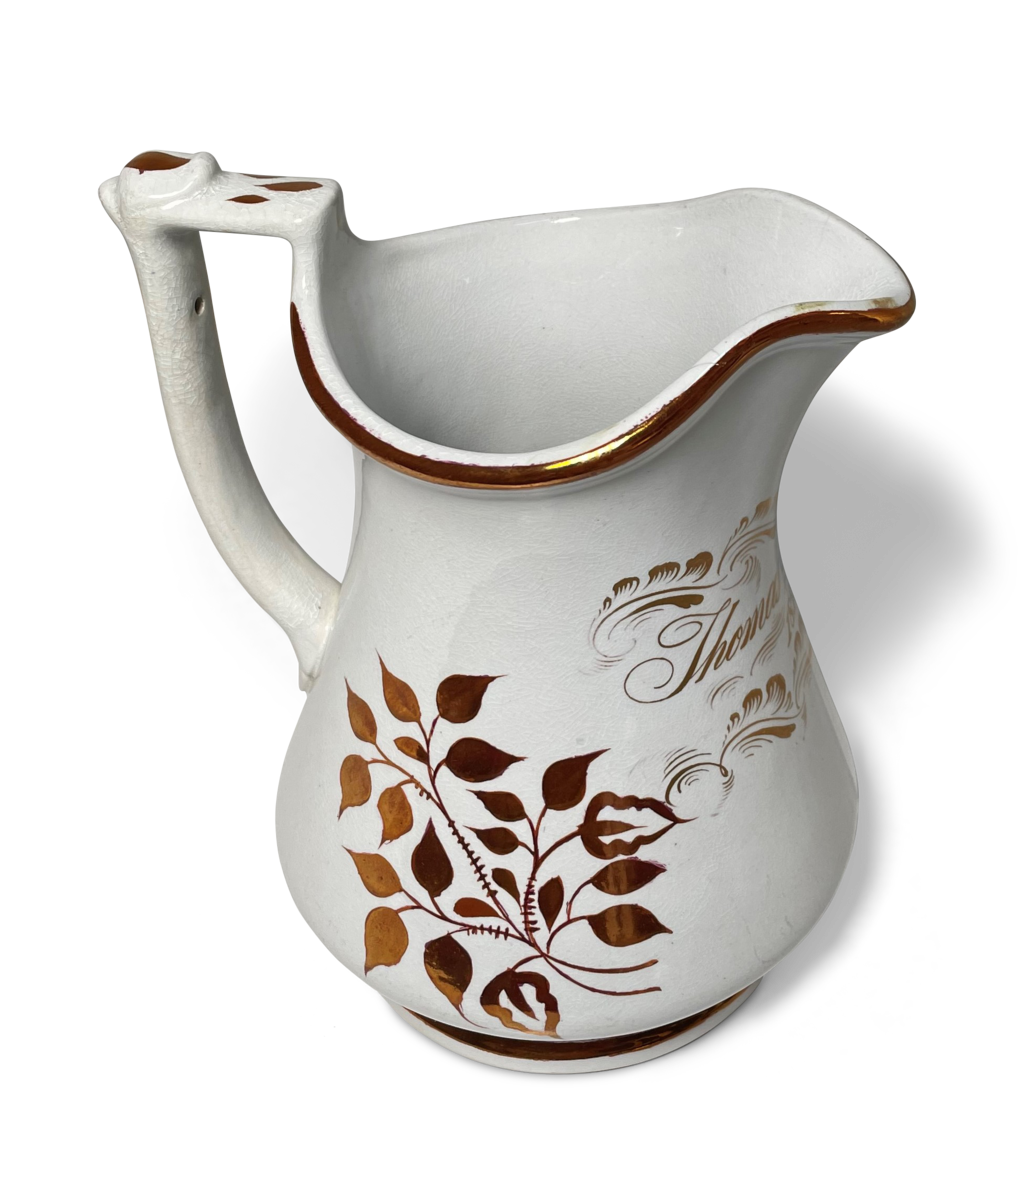 Sunderland Pearlware Puzzle Jug Inscribed to Thomas Ford 1858